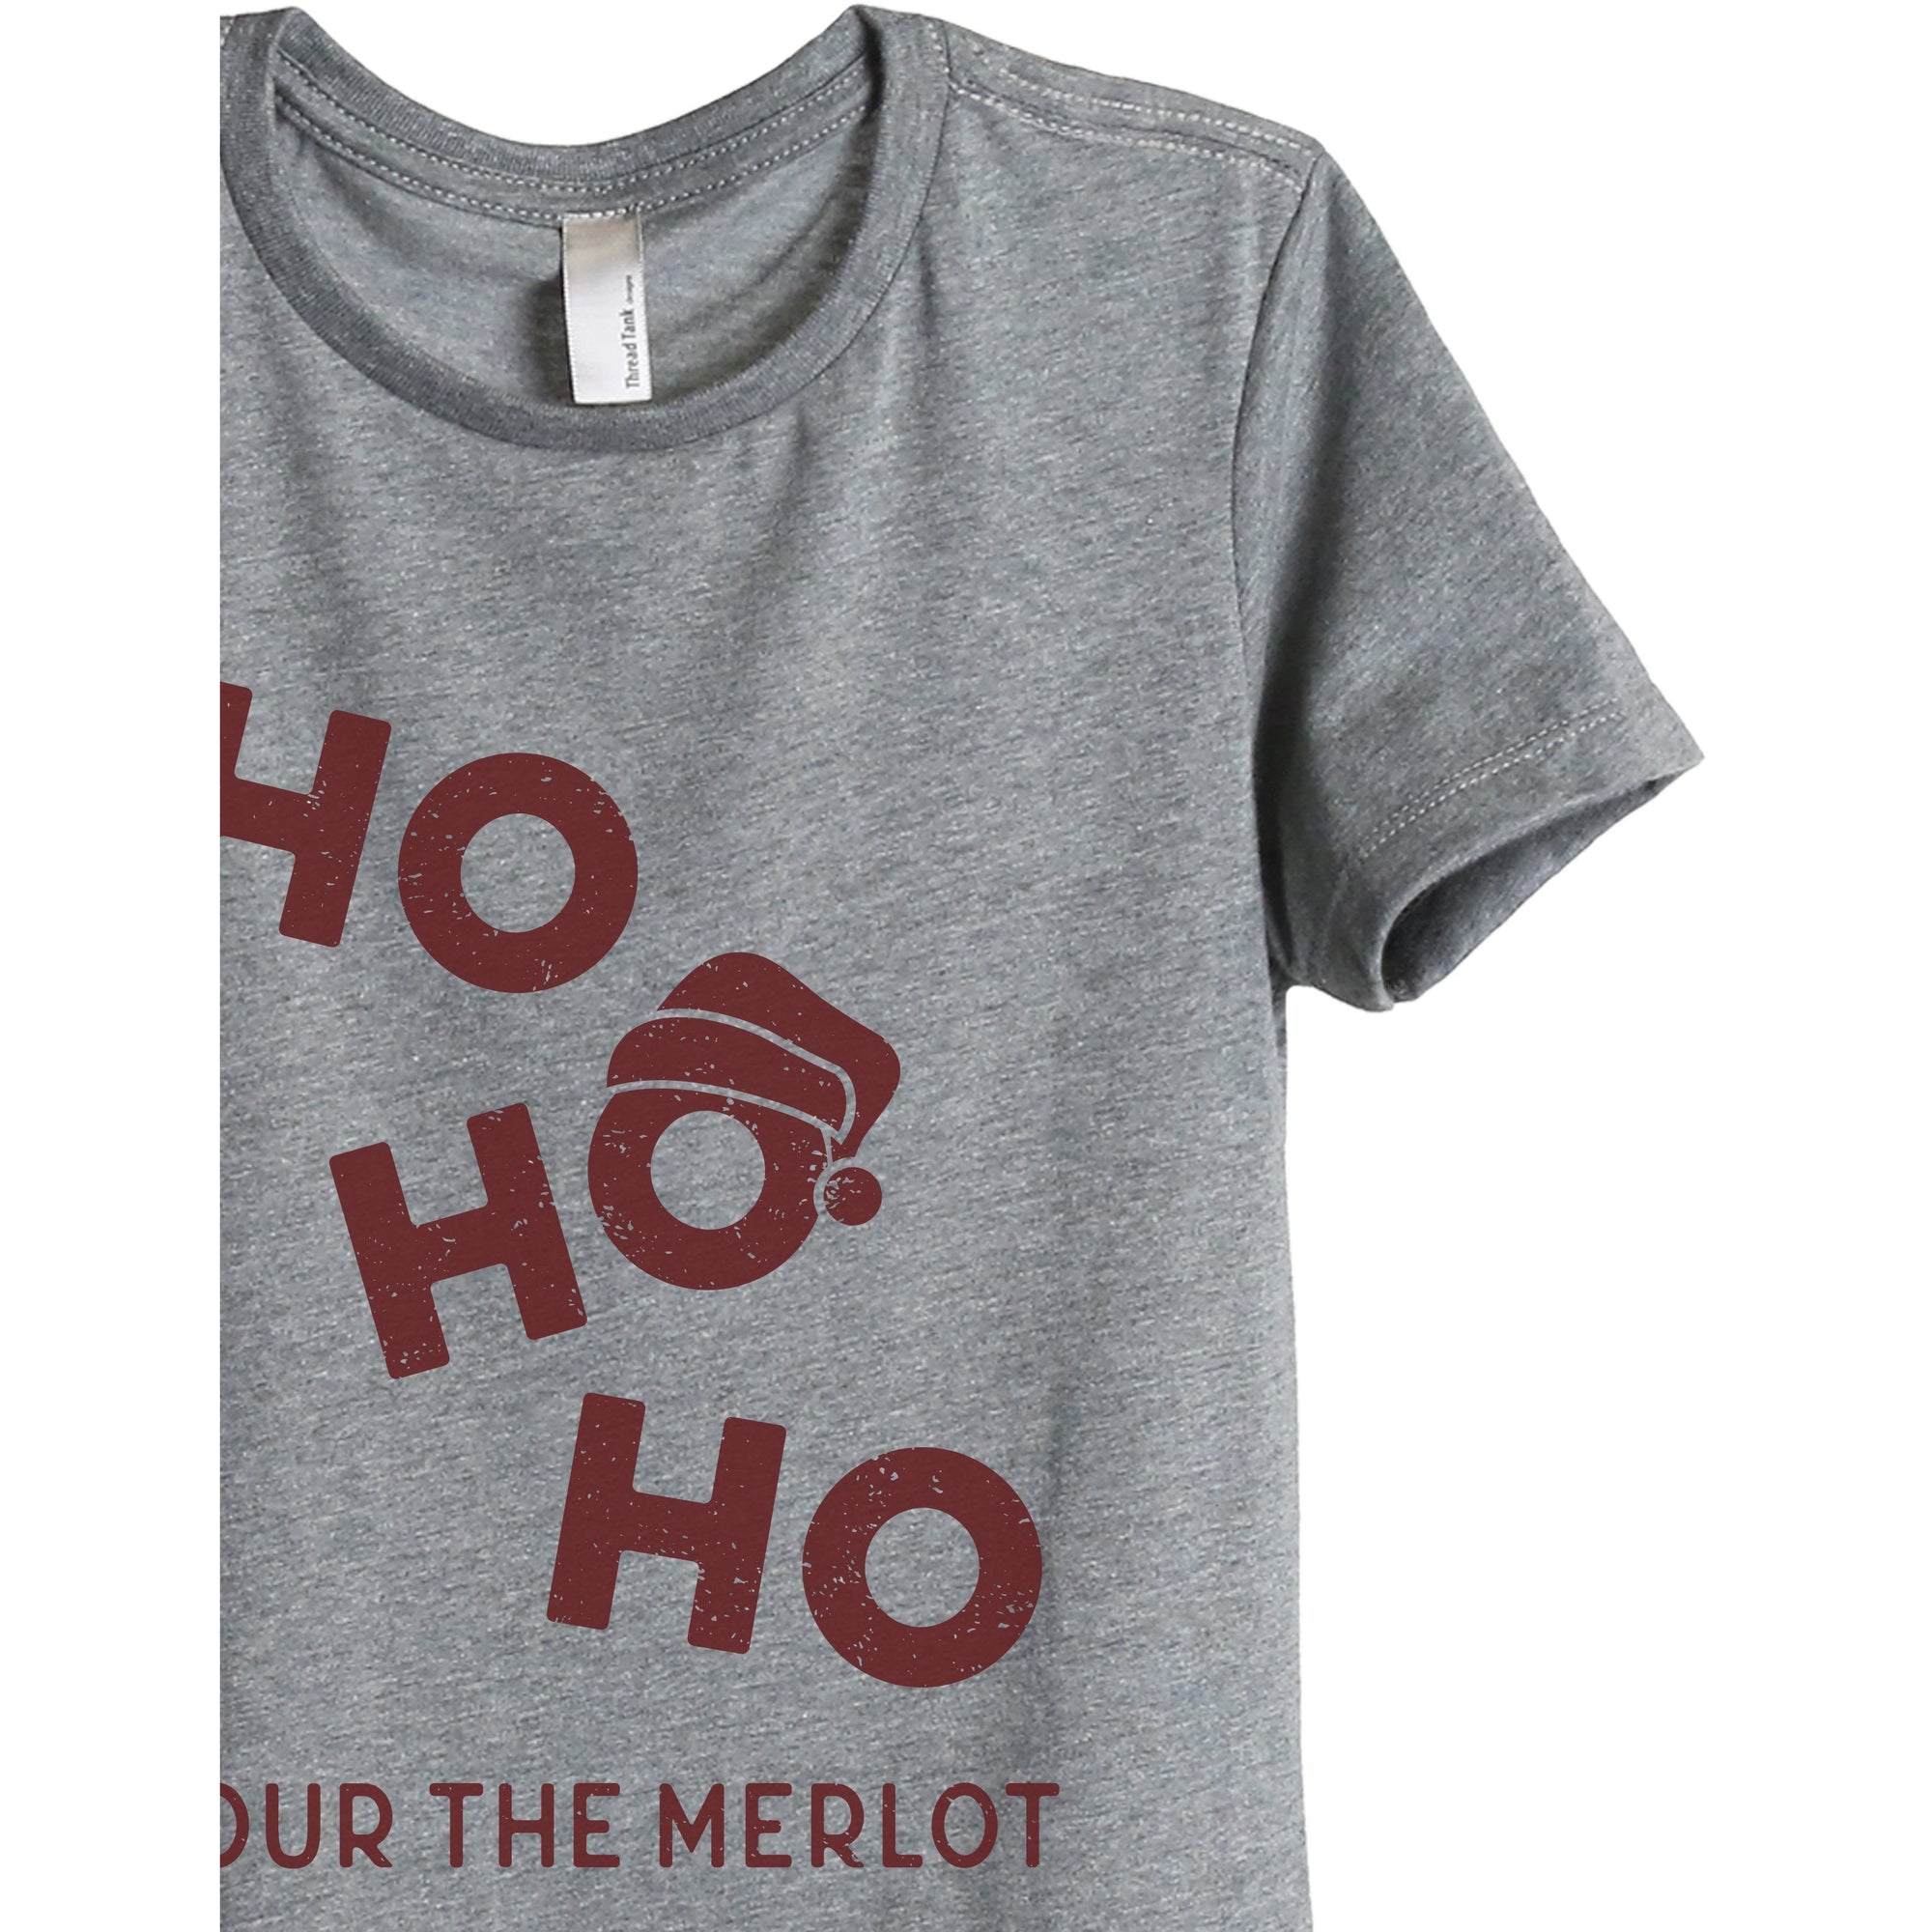 Ho Ho Ho Pour The Merlot Women's Relaxed Crewneck T-Shirt Top Tee Heather Grey Scarlet Print Zoom Details